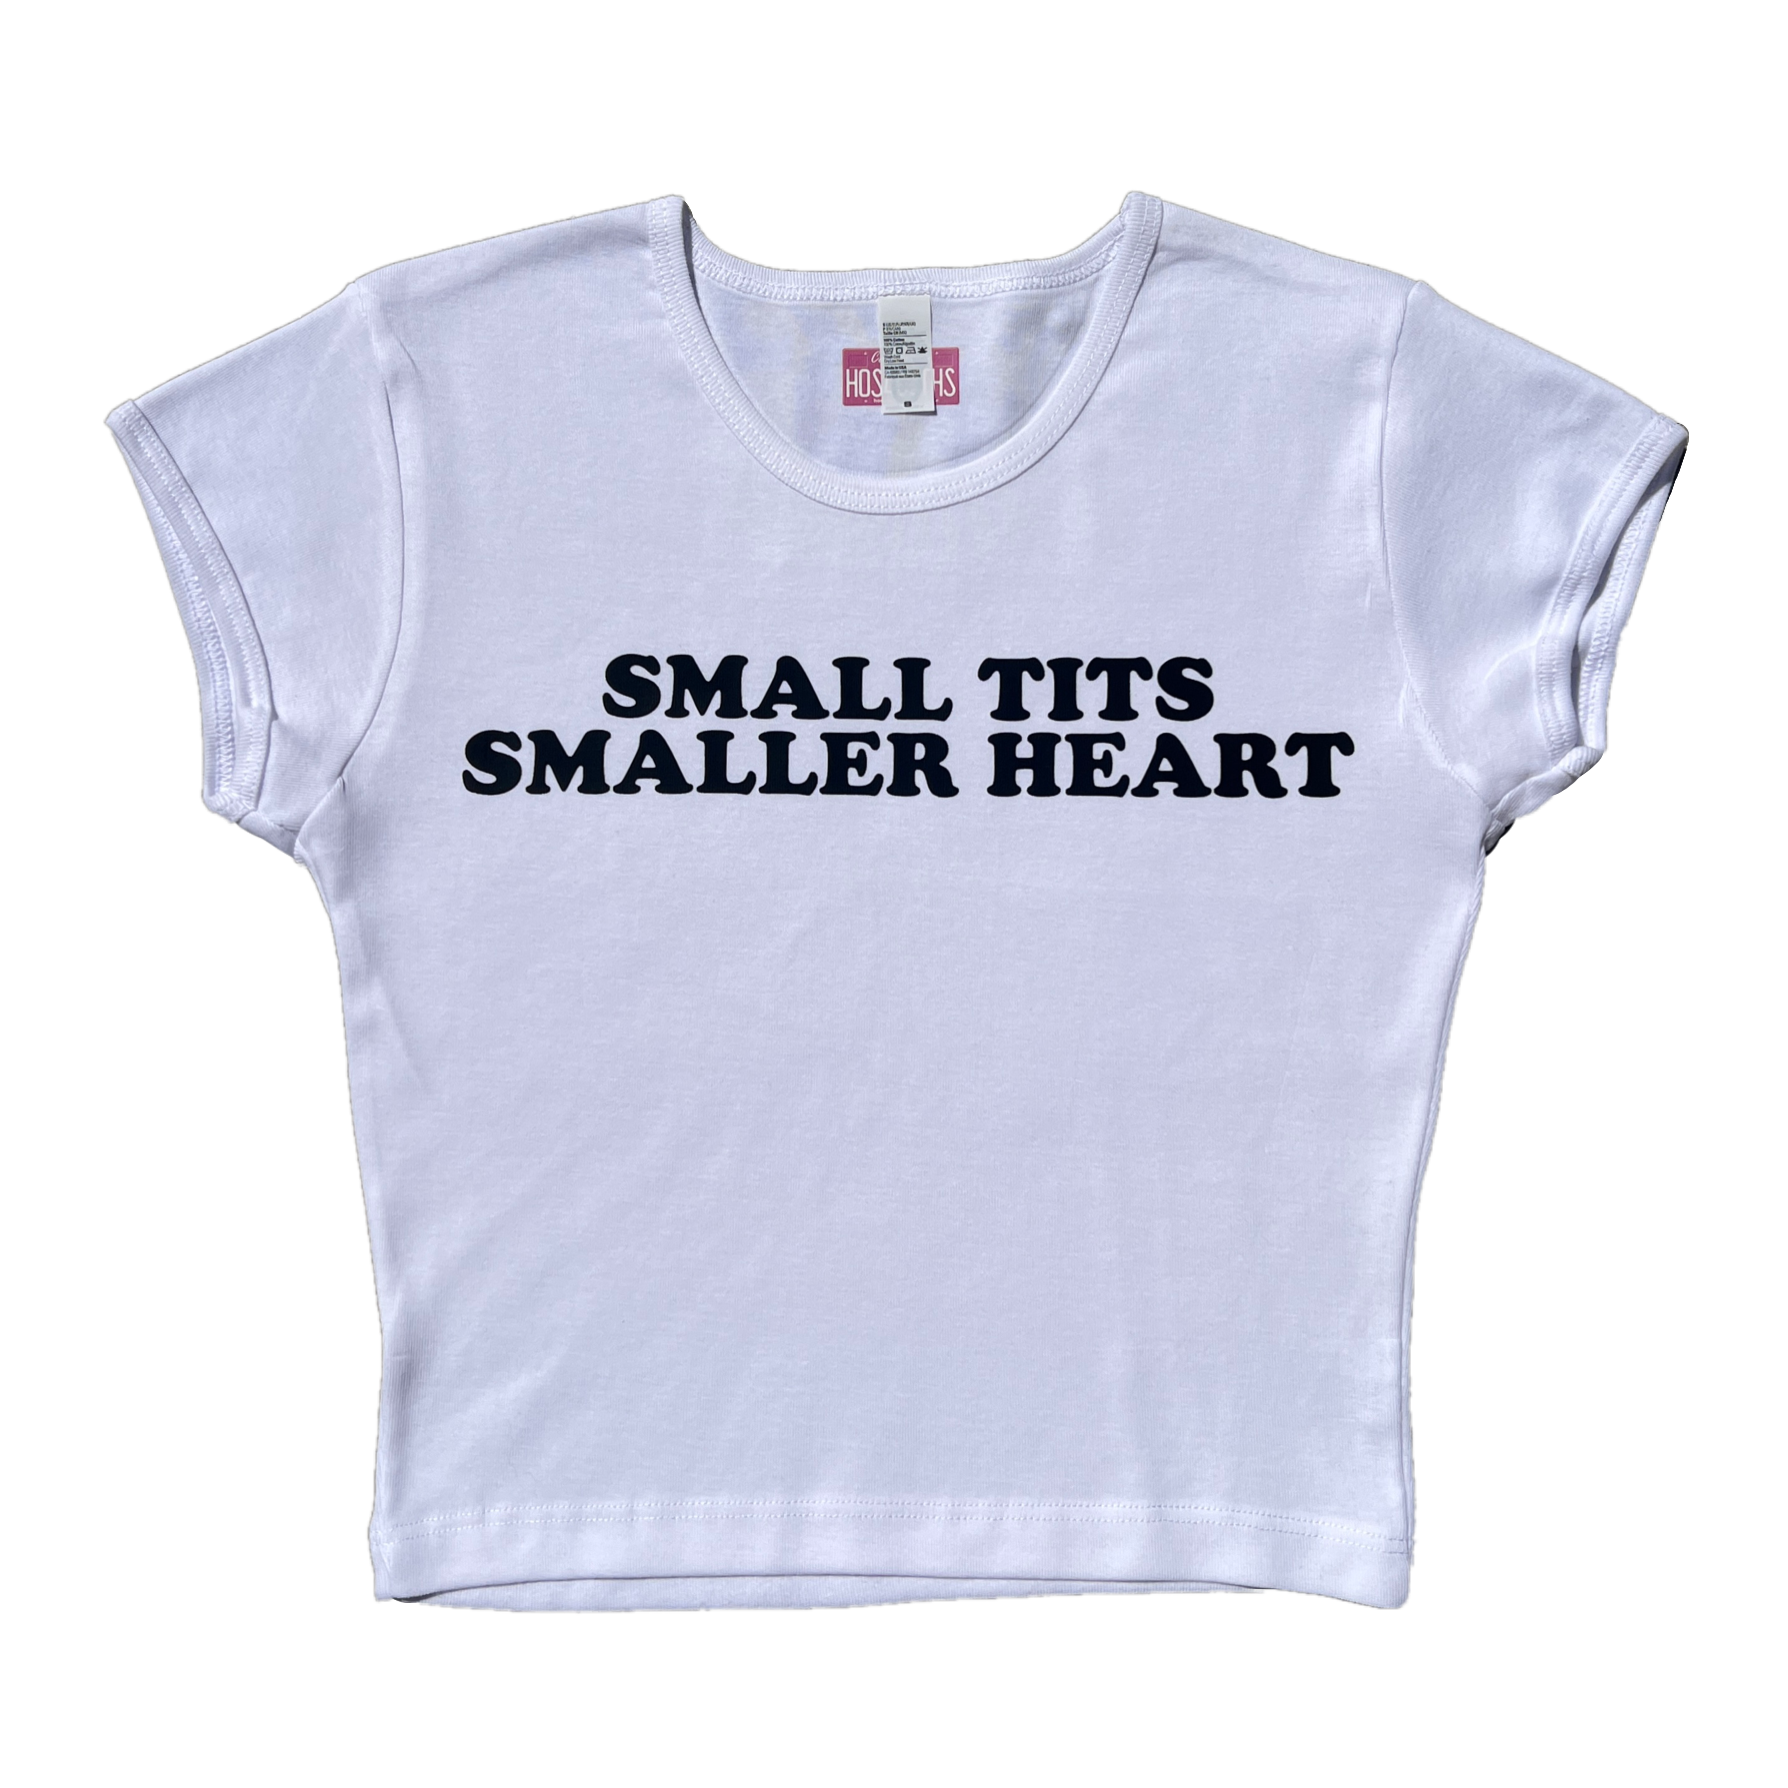 small tits smaller heart <3 baby tee – Hoes For Clothes